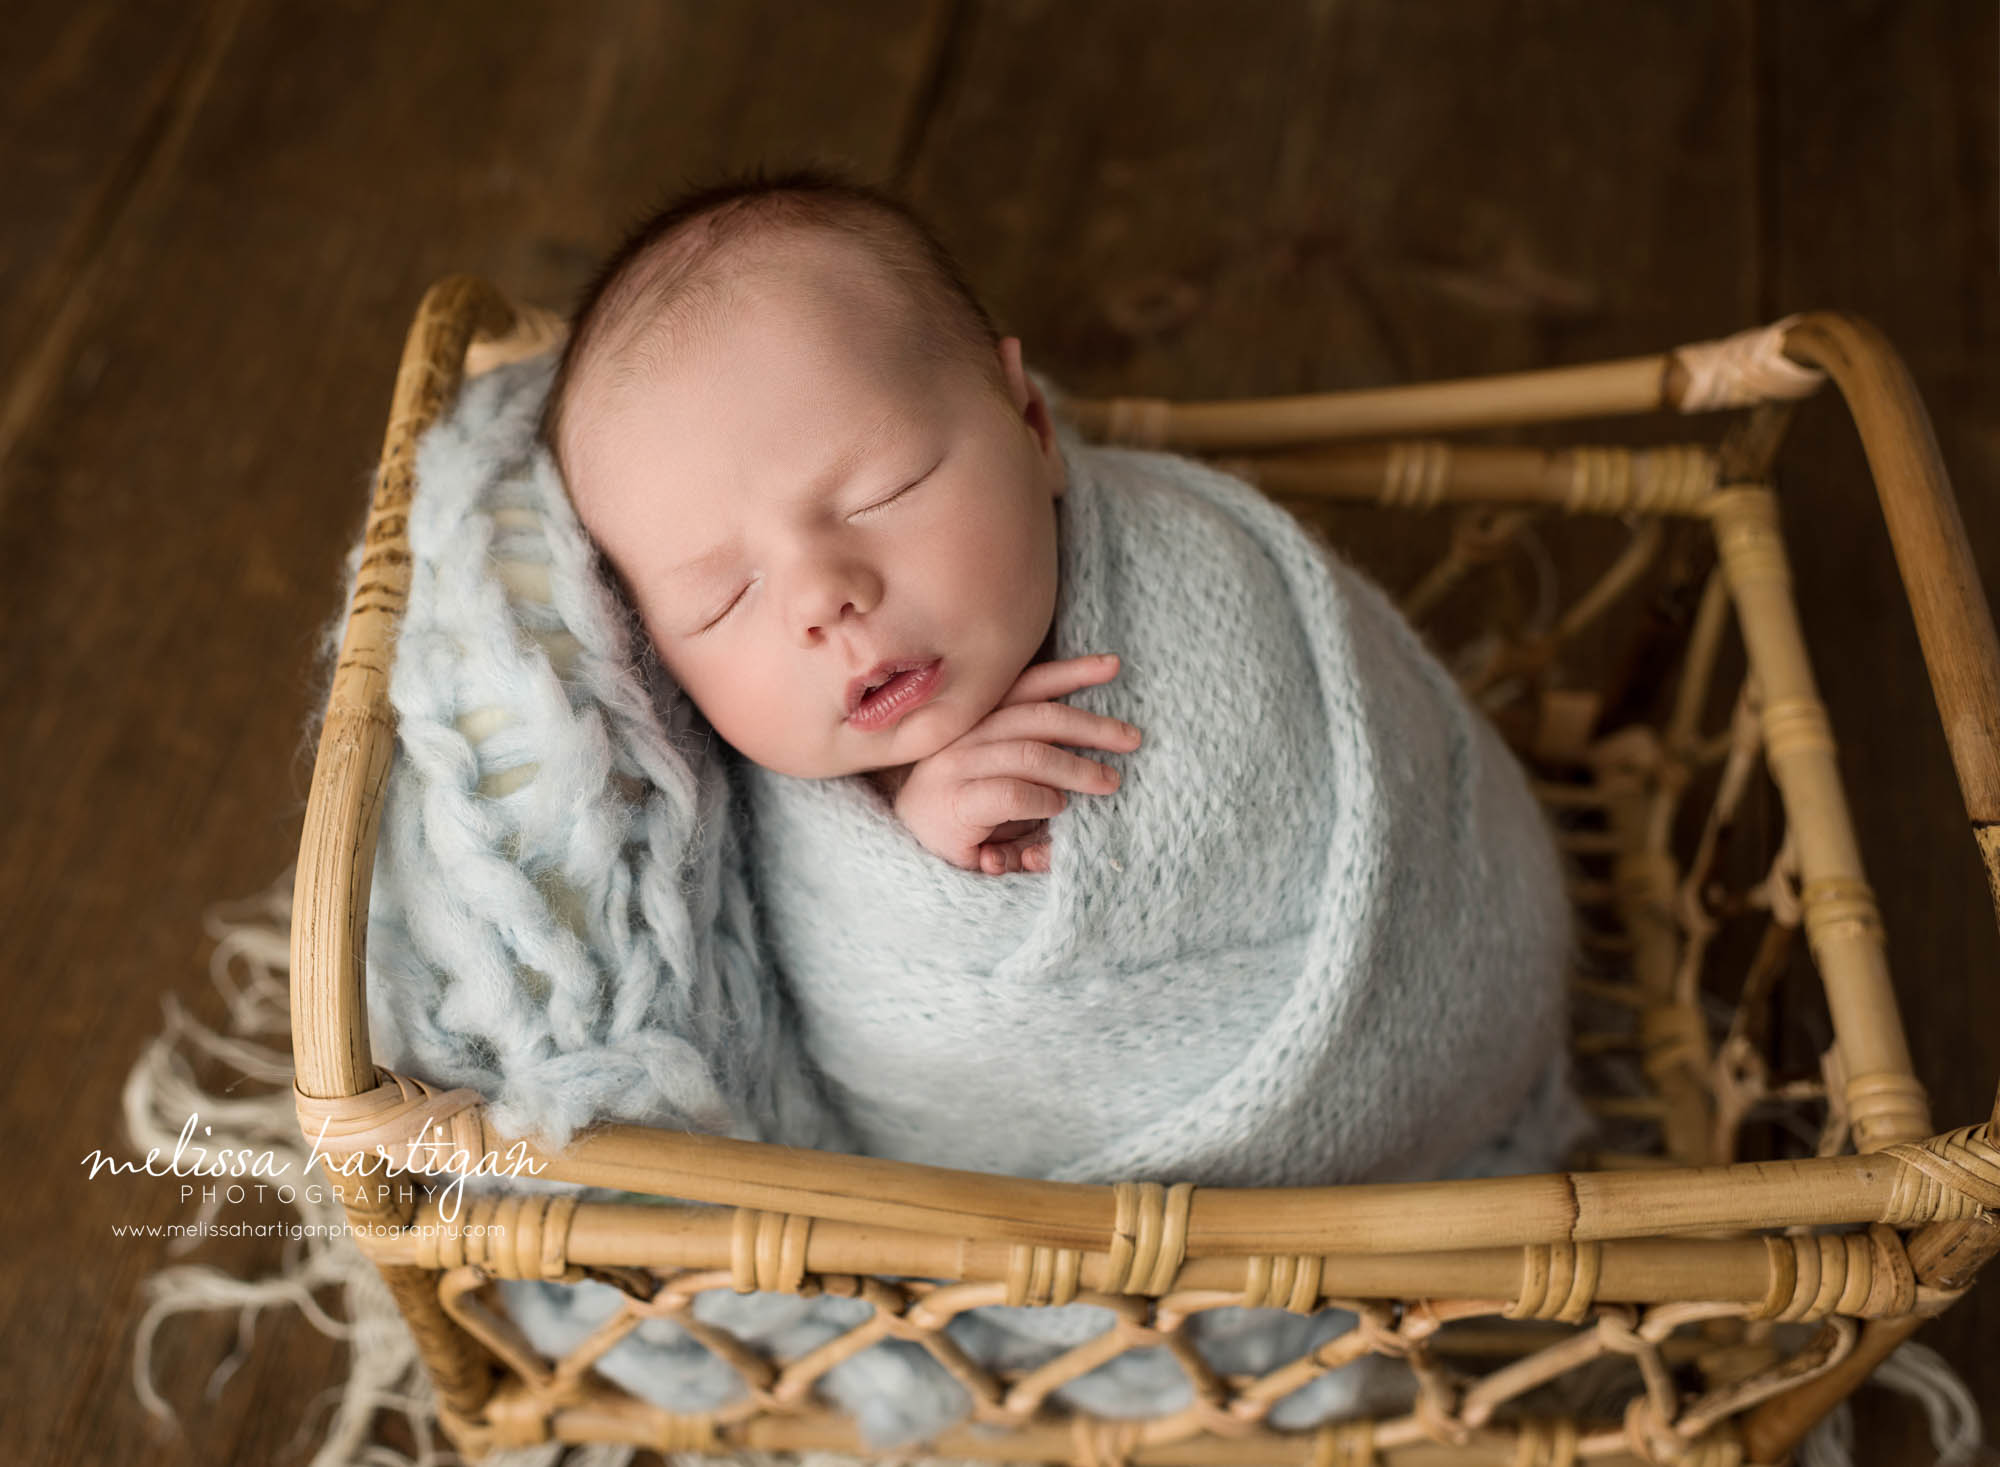 newborn baby boy wrapped in light blue knitted wrap posed in basket